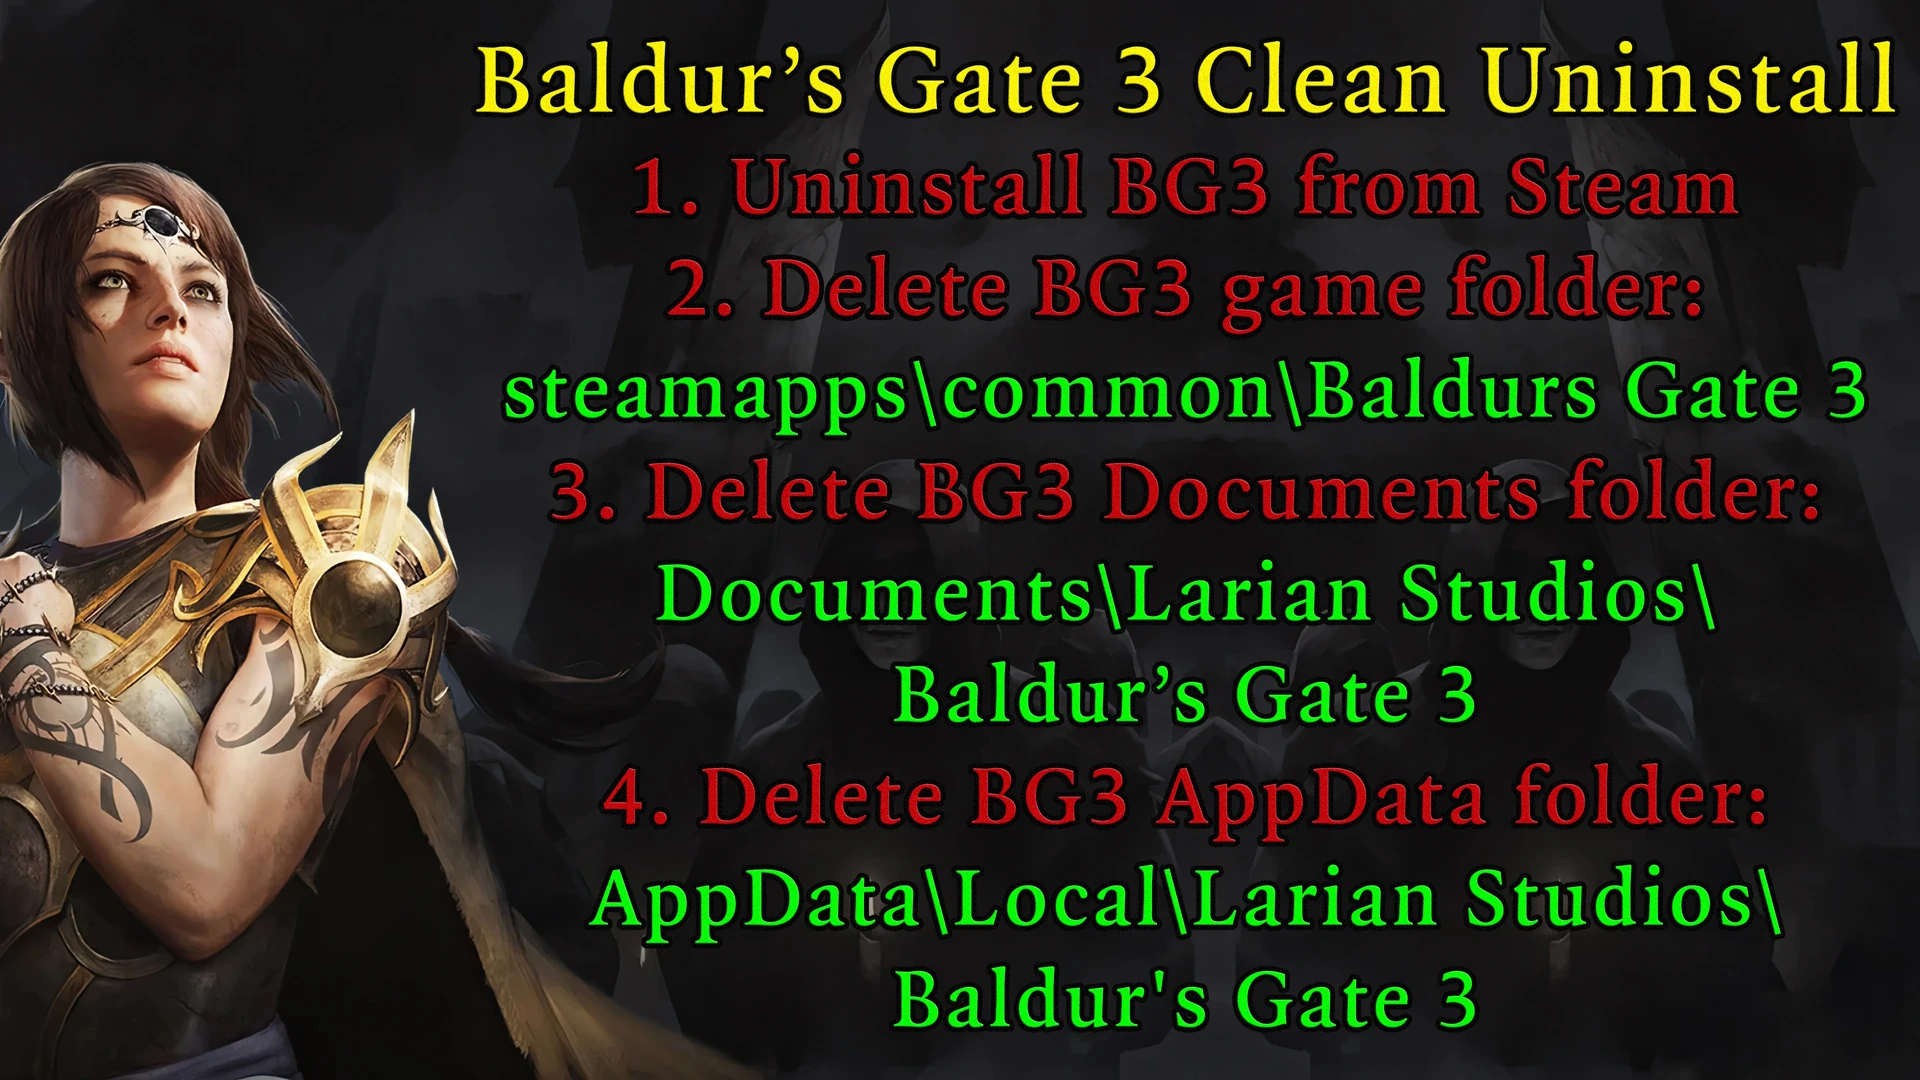 Delete your Baldur's Gate 3 saves before starting the full game